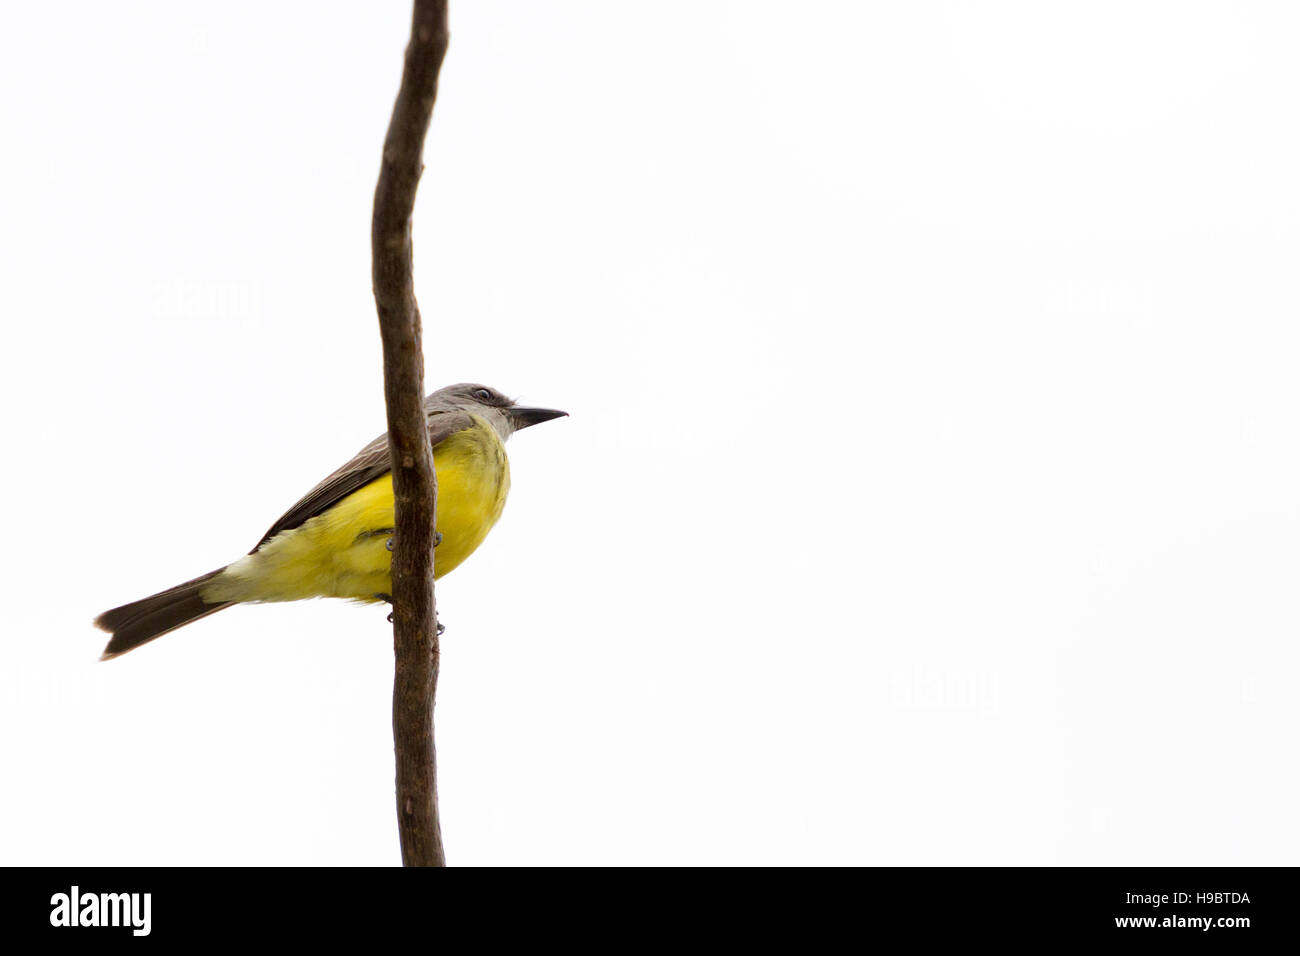 A tropical kingbird (Tyrannus melancholicus) bird basking in sun while perched on tree branch, is seen during sunny day in Asuncion, Paraguay Stock Photo